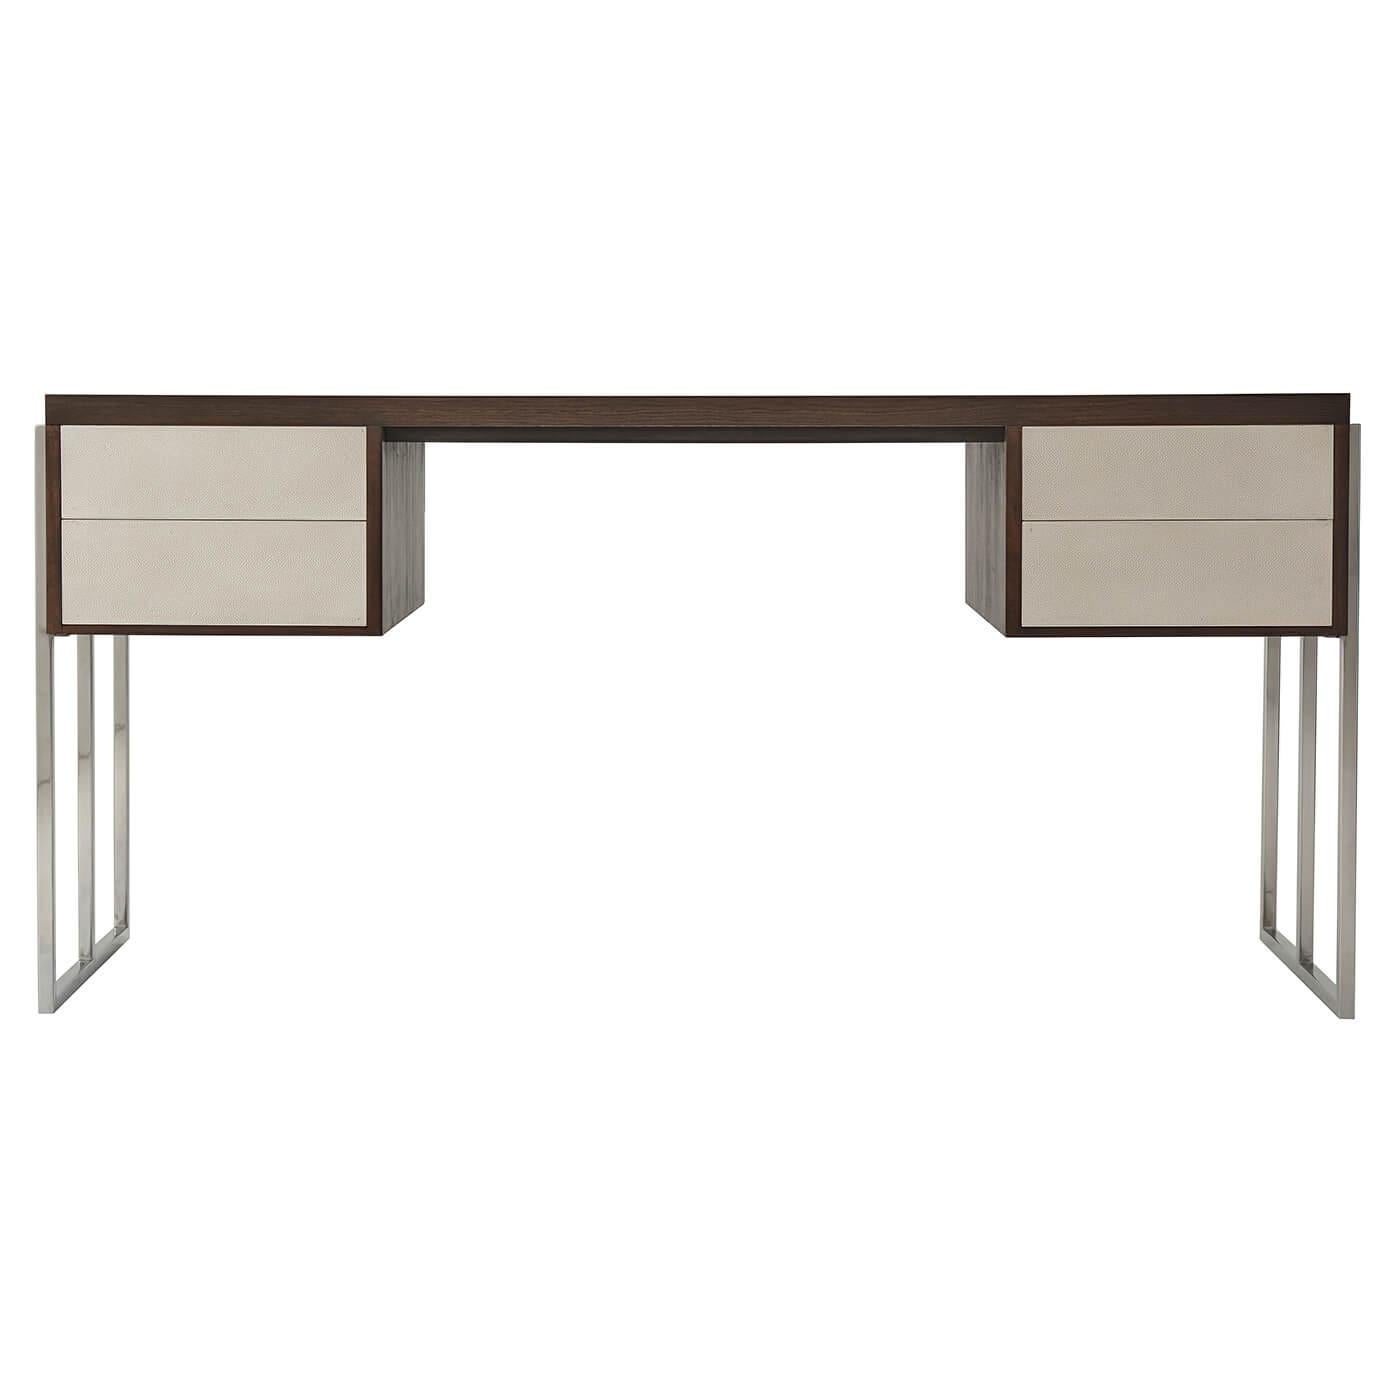 Vietnamese Modern Desk with Polished Nickel Supports For Sale